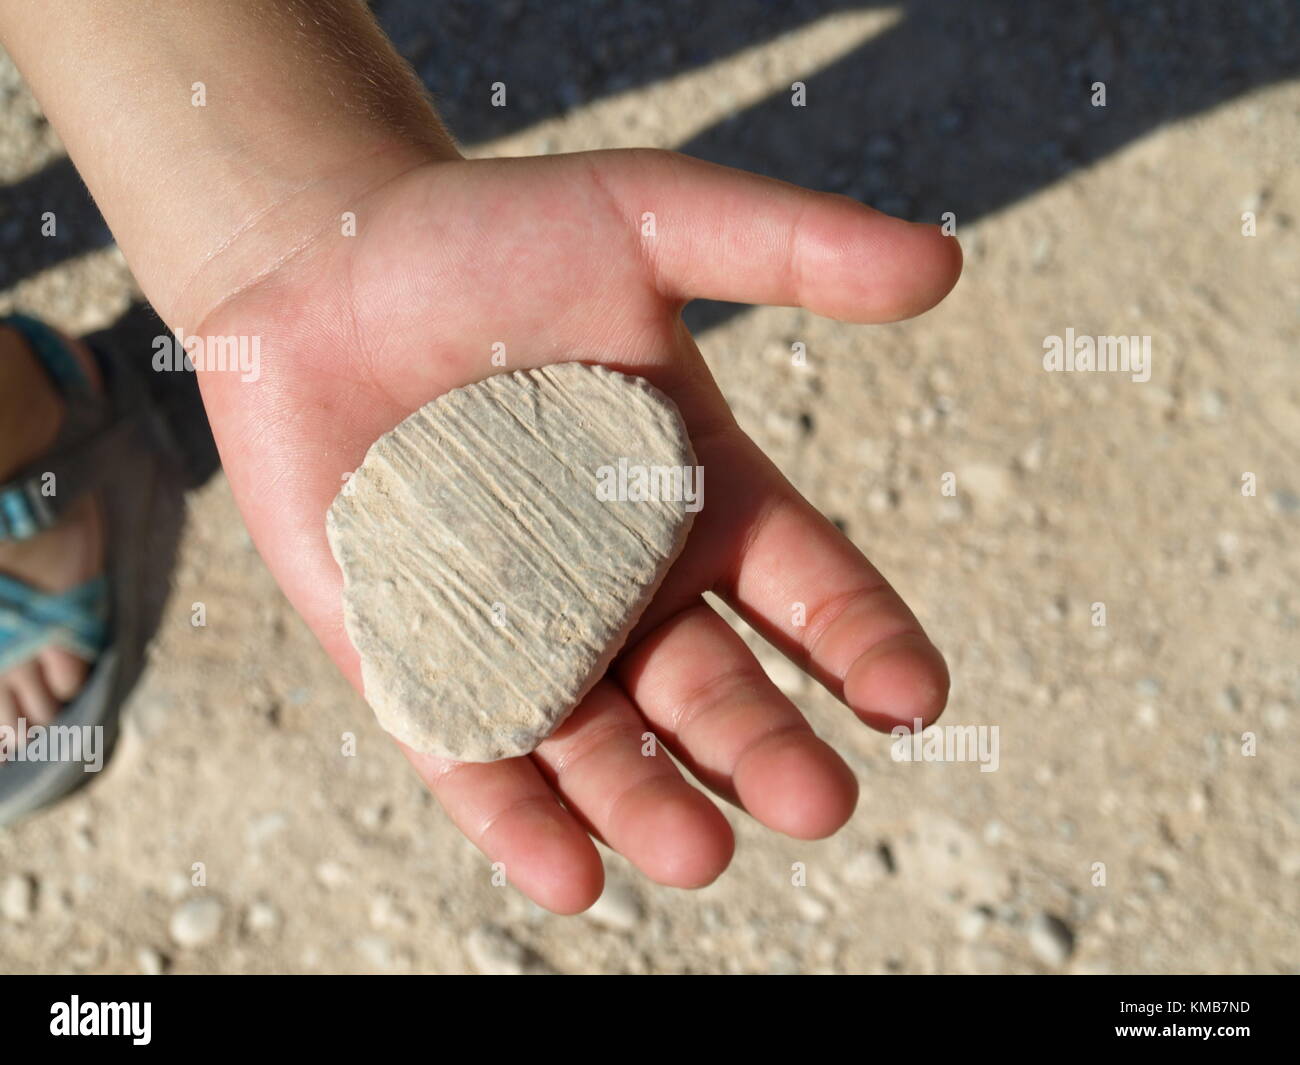 a child hand holding stone he for his stone collection Stock Photo